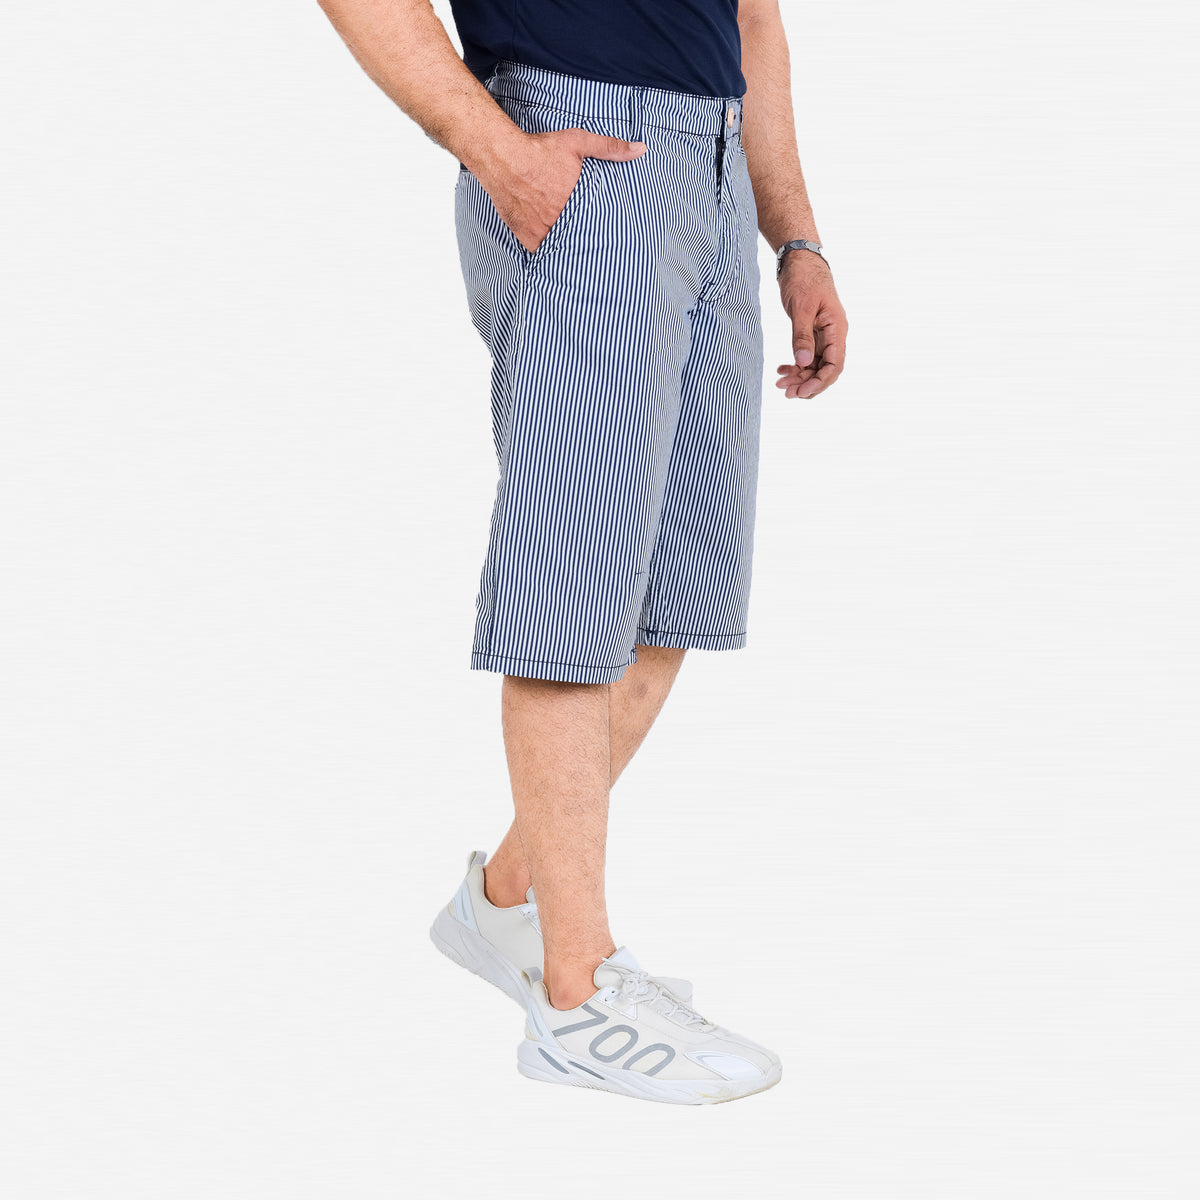 Men's Slim Fit Casual Chino Shorts